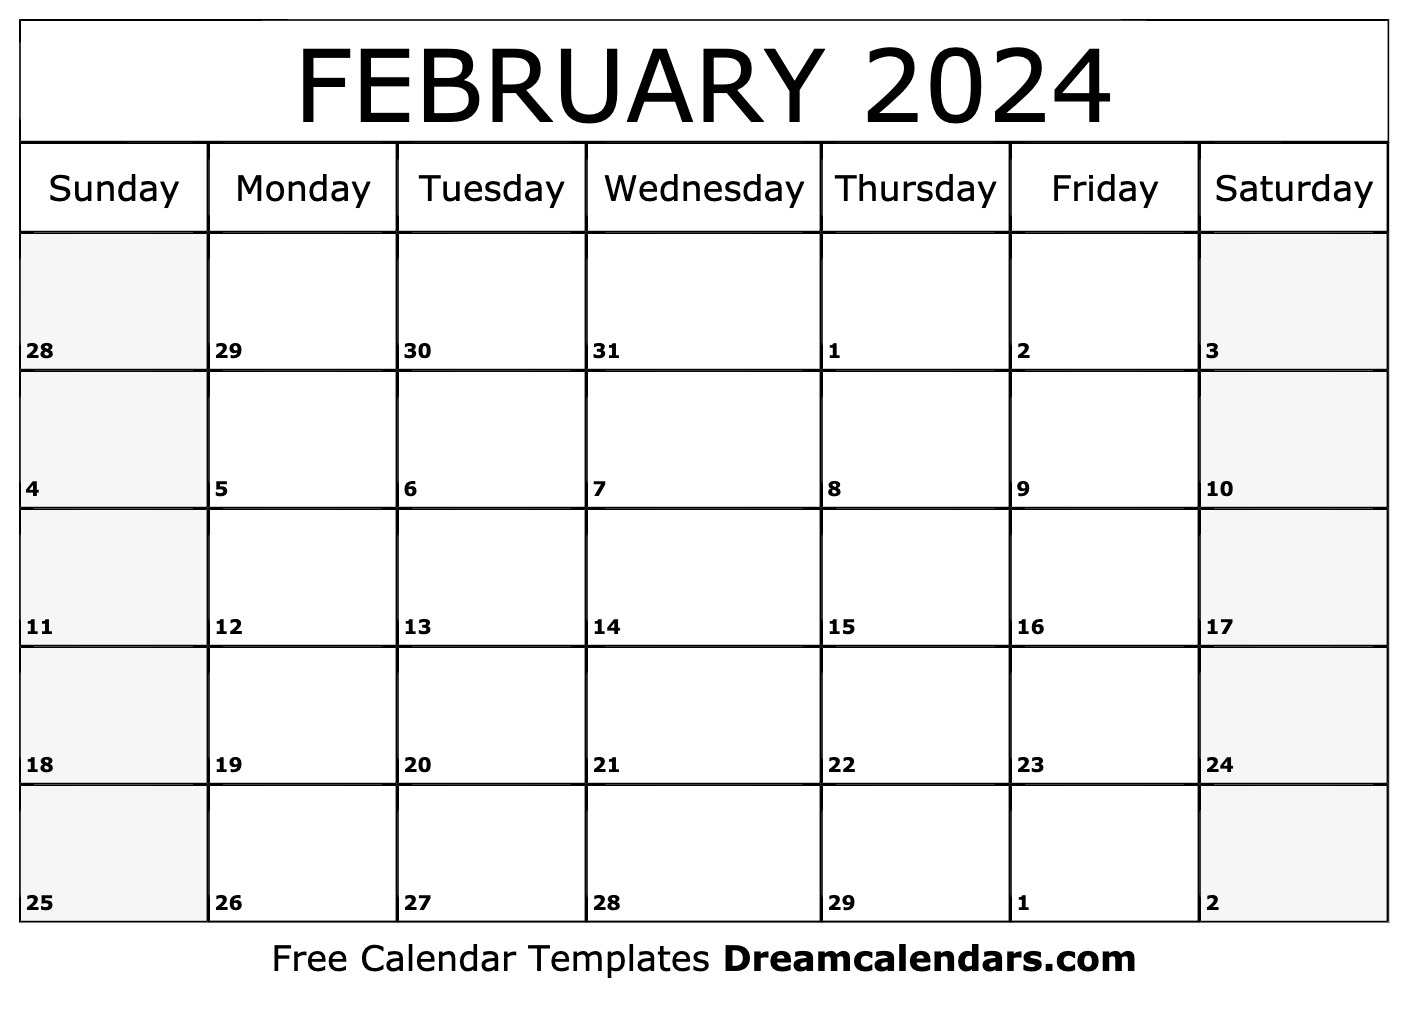 february-days-this-year-2024-cool-ultimate-popular-list-of-lunar